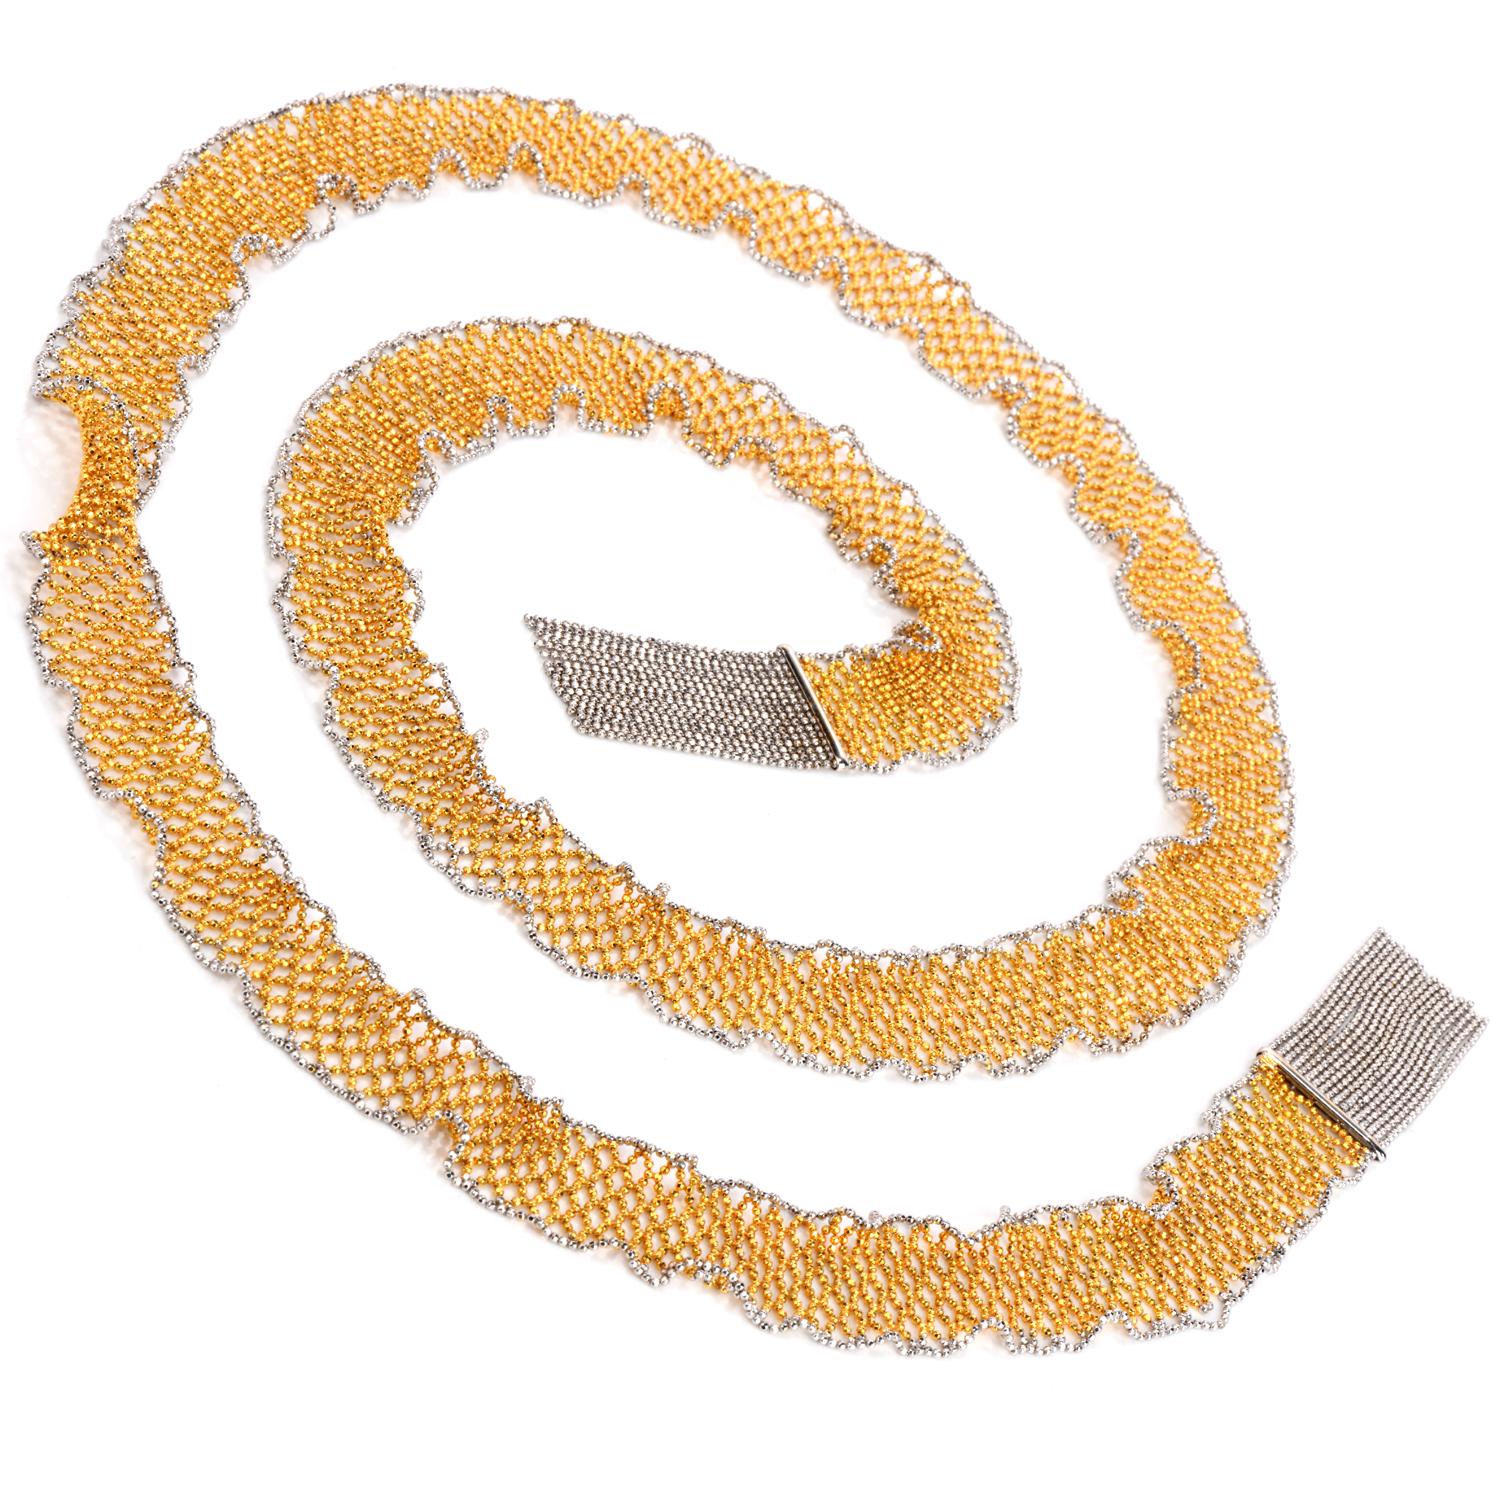 This extra long Italian Made Mesh Scarf necklace is crafted in solid 18k yellow with 18k white gold borders. 

This fashionable wrap around bead necklace is 41 inches long and 20 mm wide

with 18k white gold tassel at the end.

Weight : 107.2